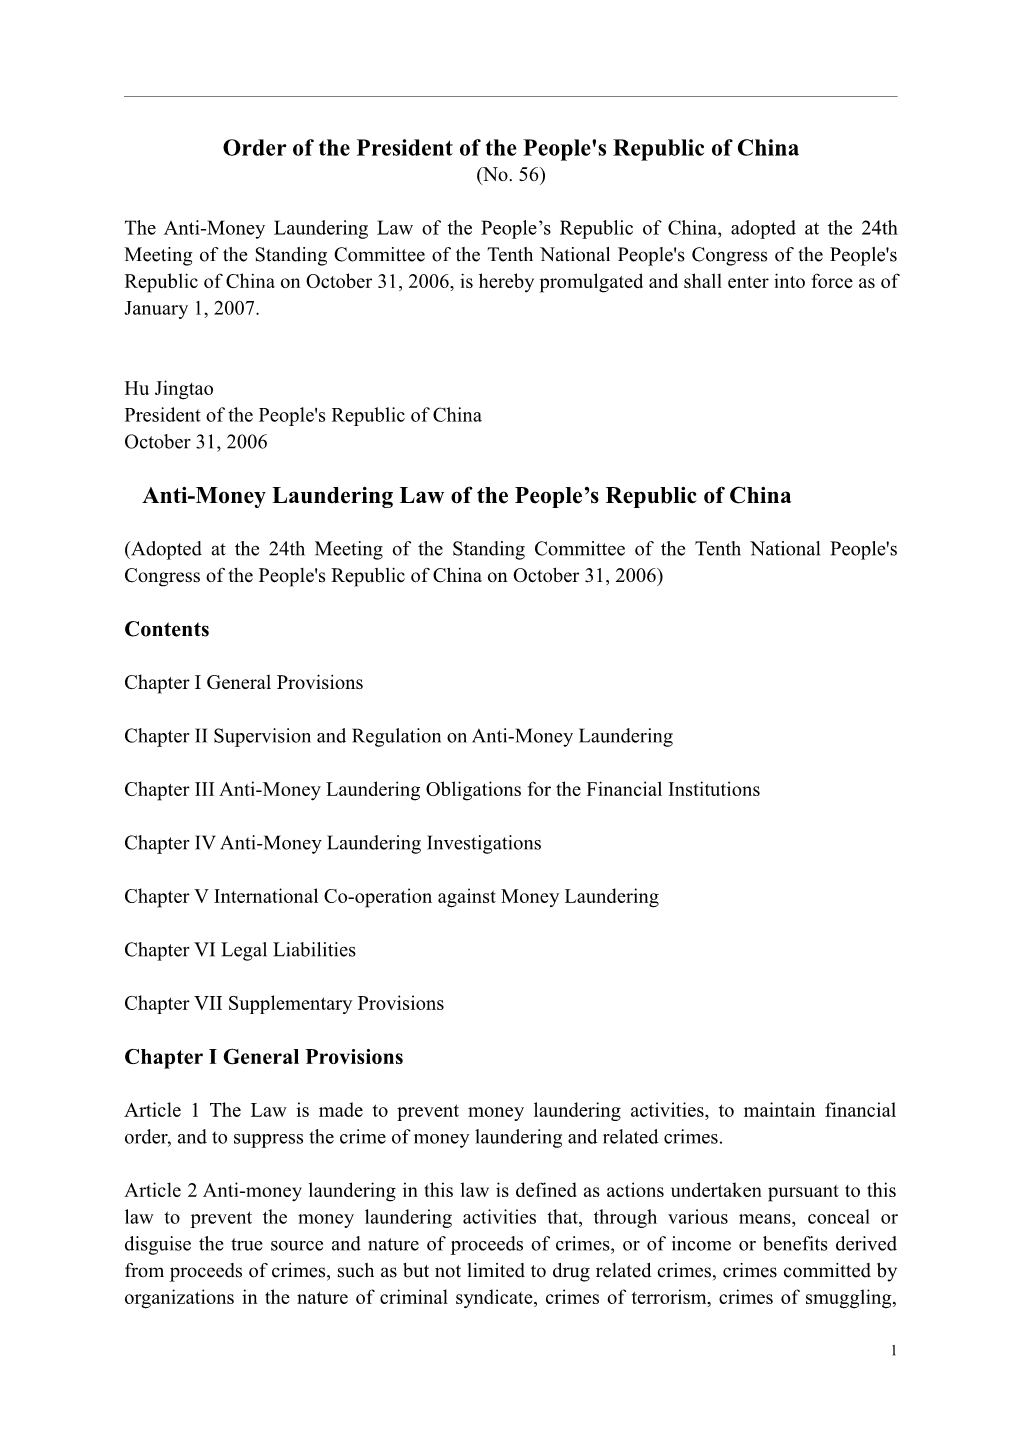 Introduction of the Law of the People S Republic of China on the Anti-Money Laundering (Draft)